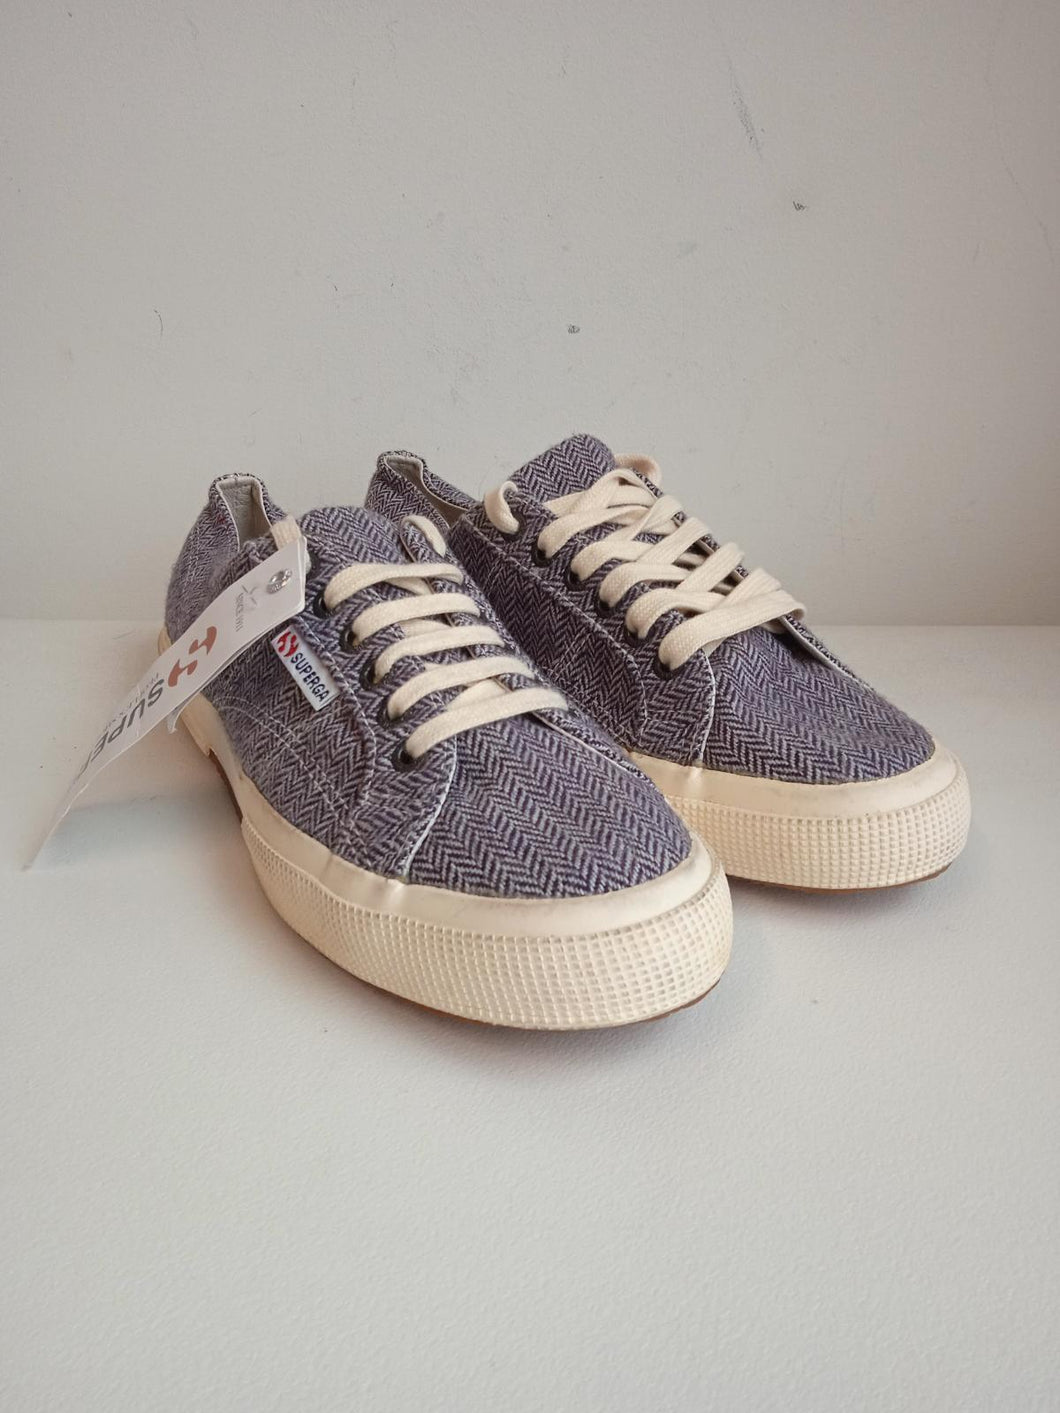 SUPERGA Men's Blue & White Herringbone Low-Top Lace-Up Trainers Size UK7 NEW